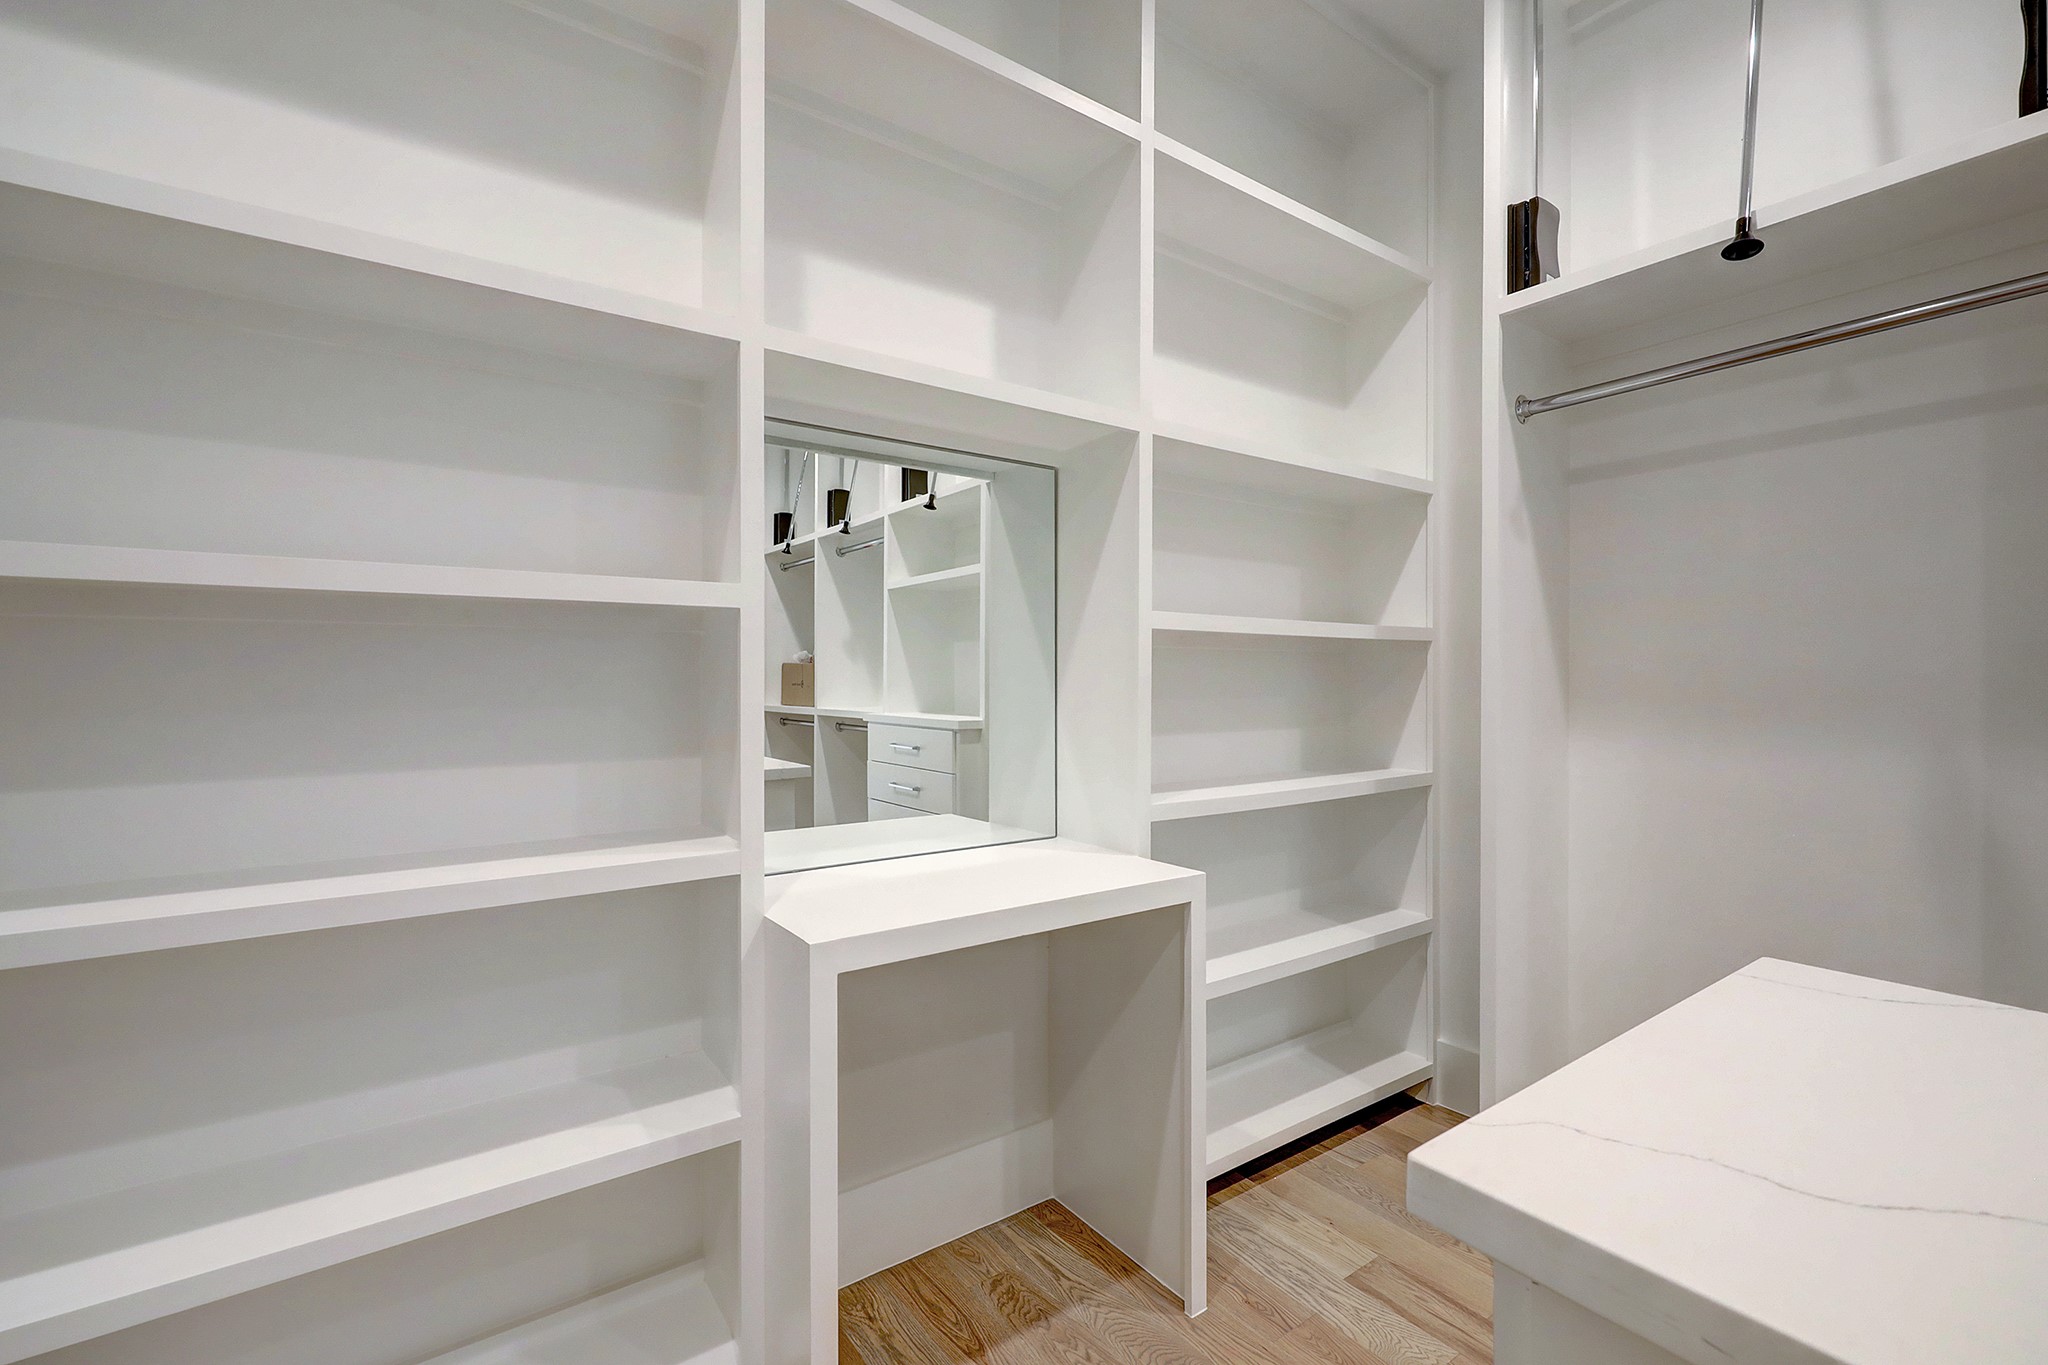 Primary closet with built-in and abundant hanging space